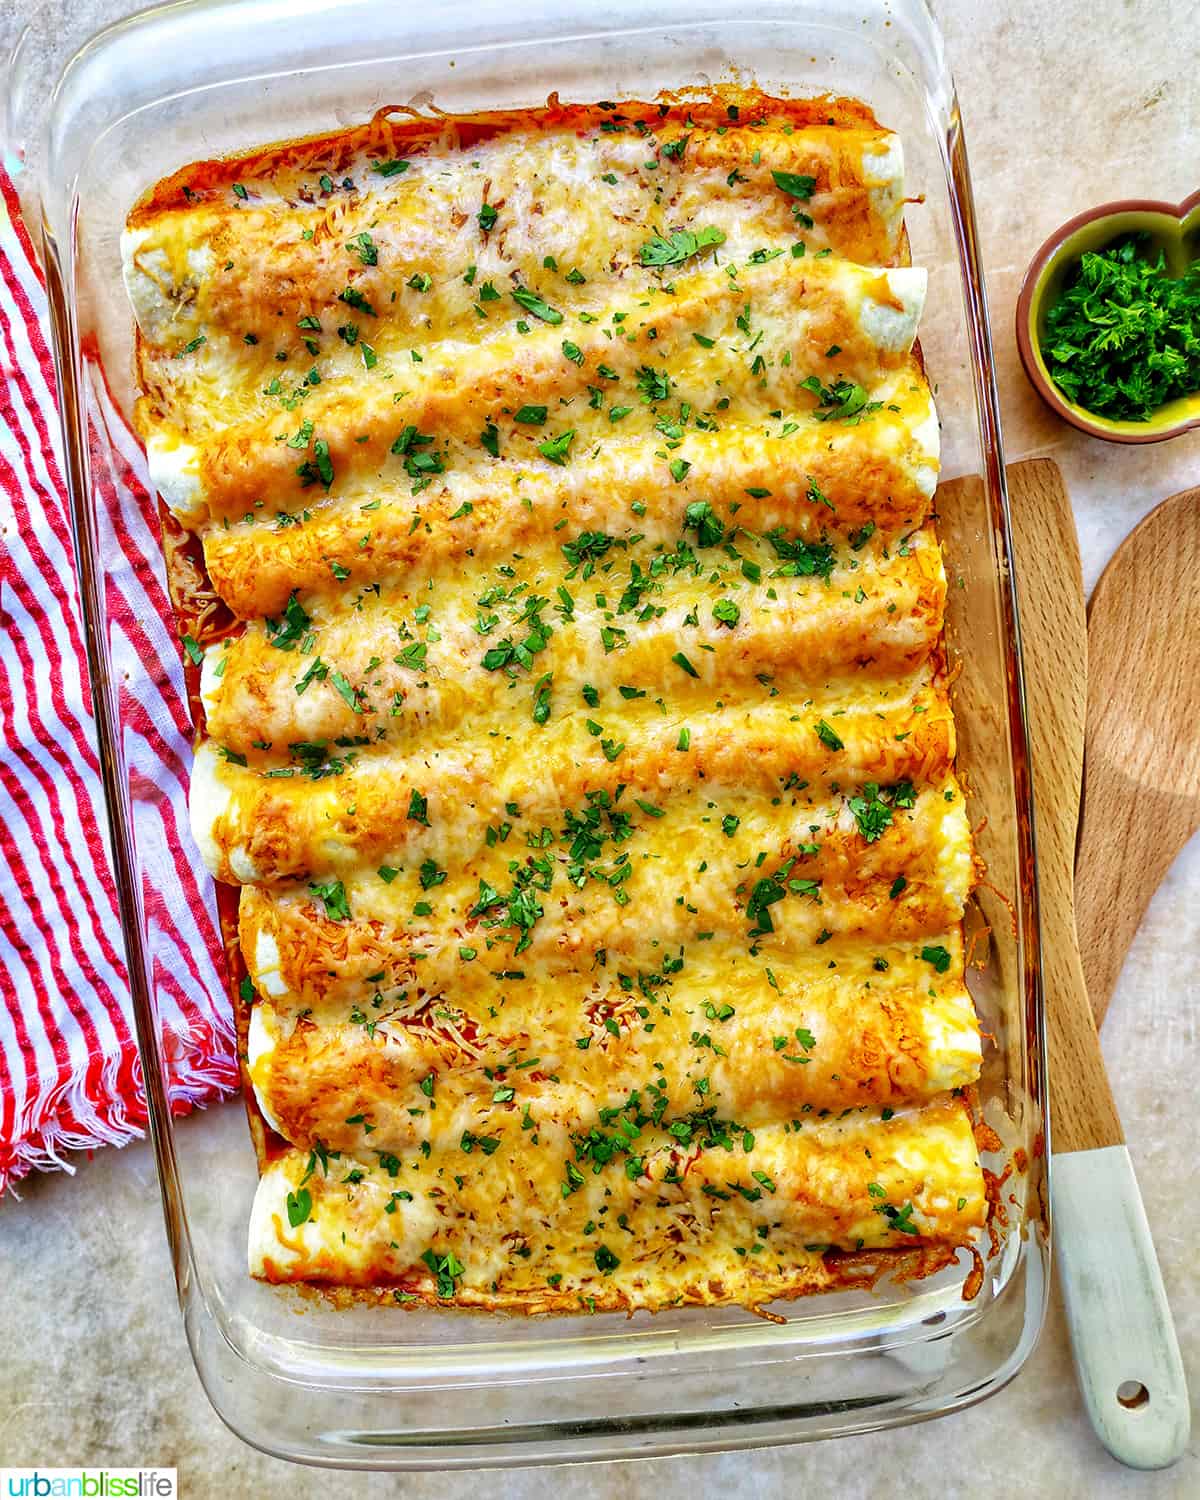 cheesy turkey enchiladas casserole in a glass baking dish with red and white striped towel.